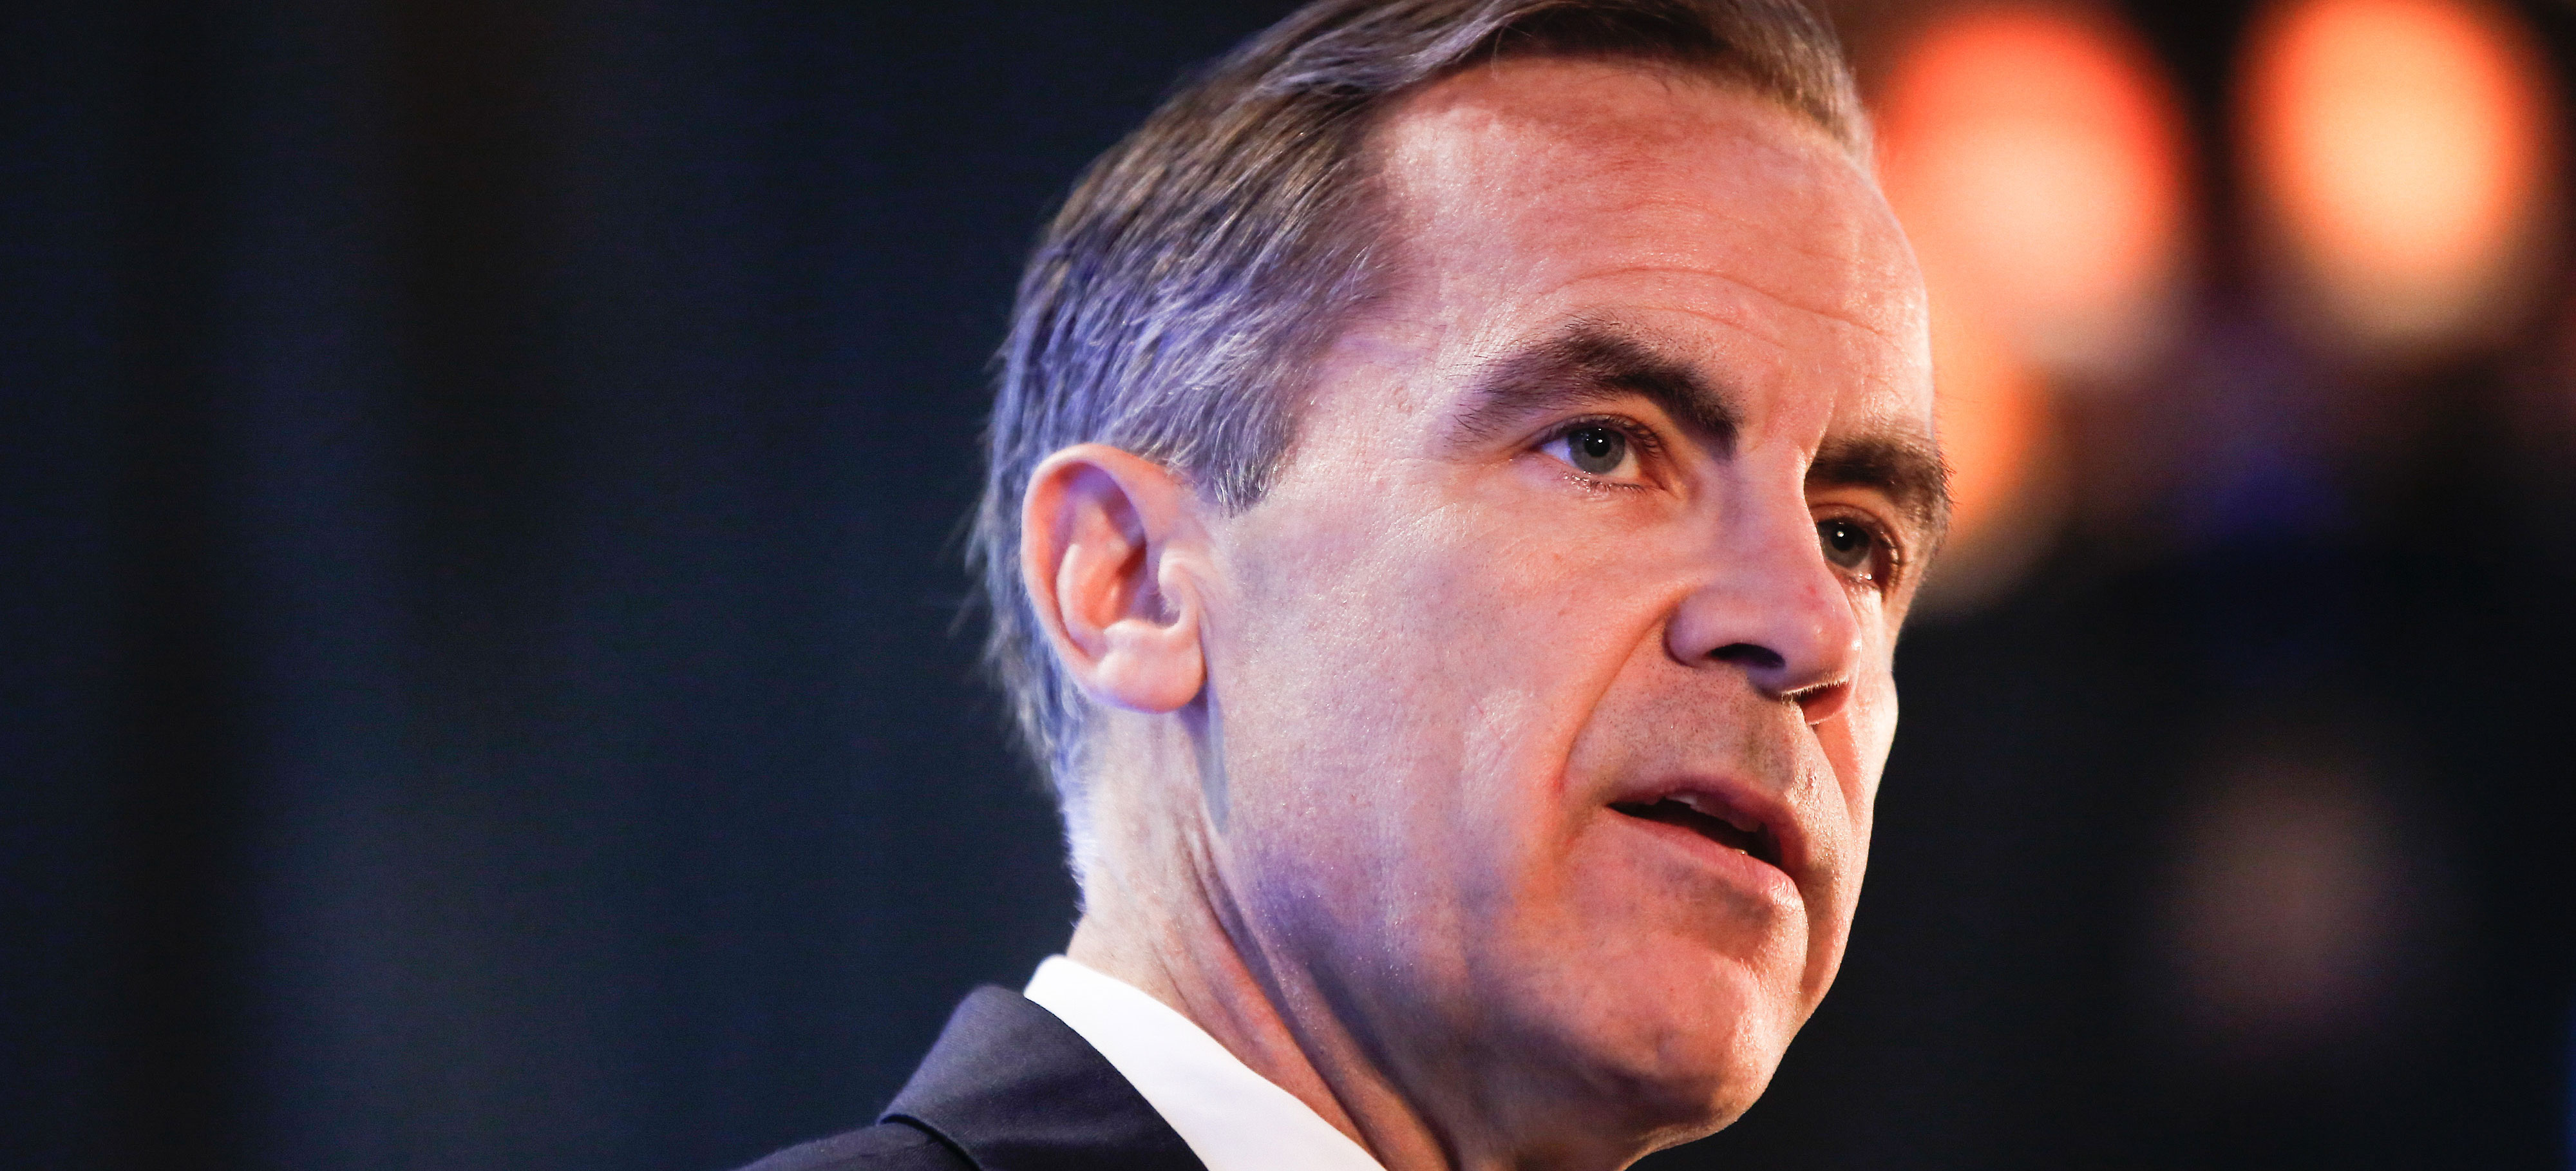 Bank Of England Governor Issues Statement to Pacify the Markets on Brexit